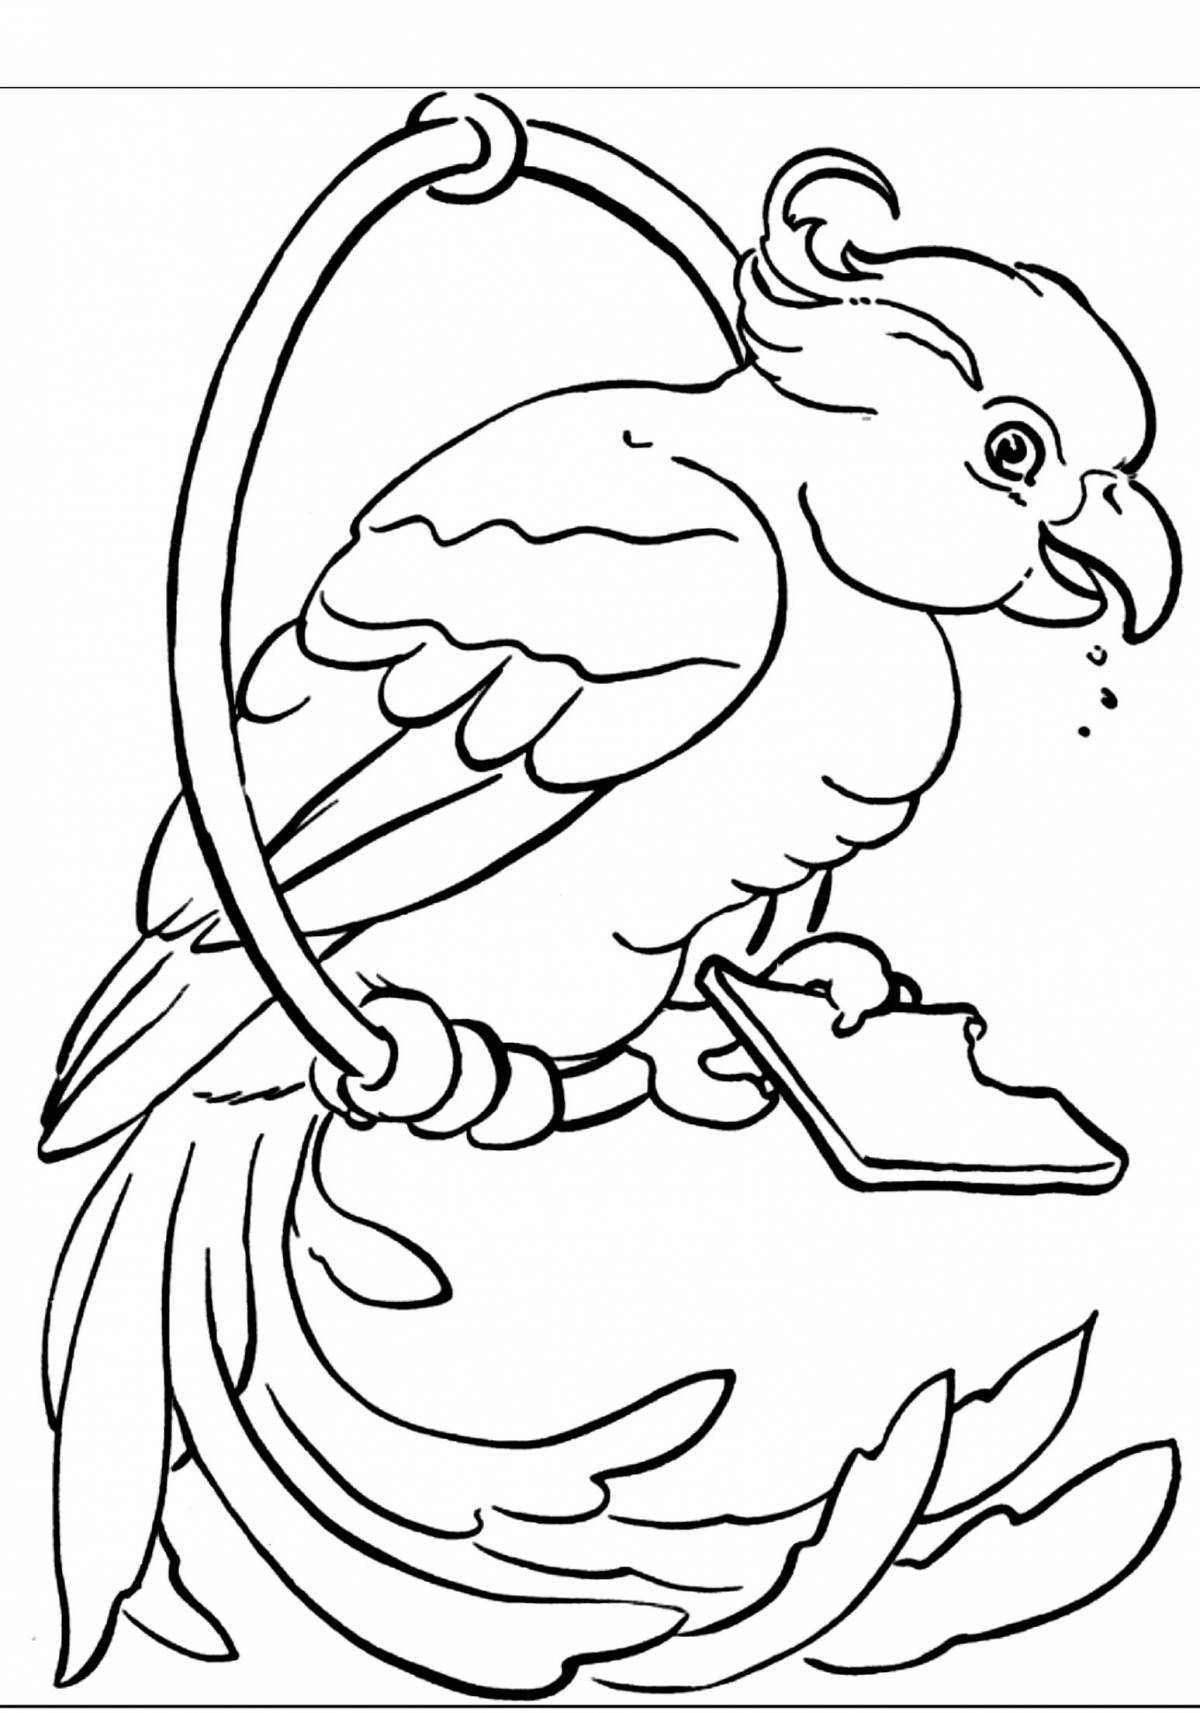 Exotic animal and bird coloring pages